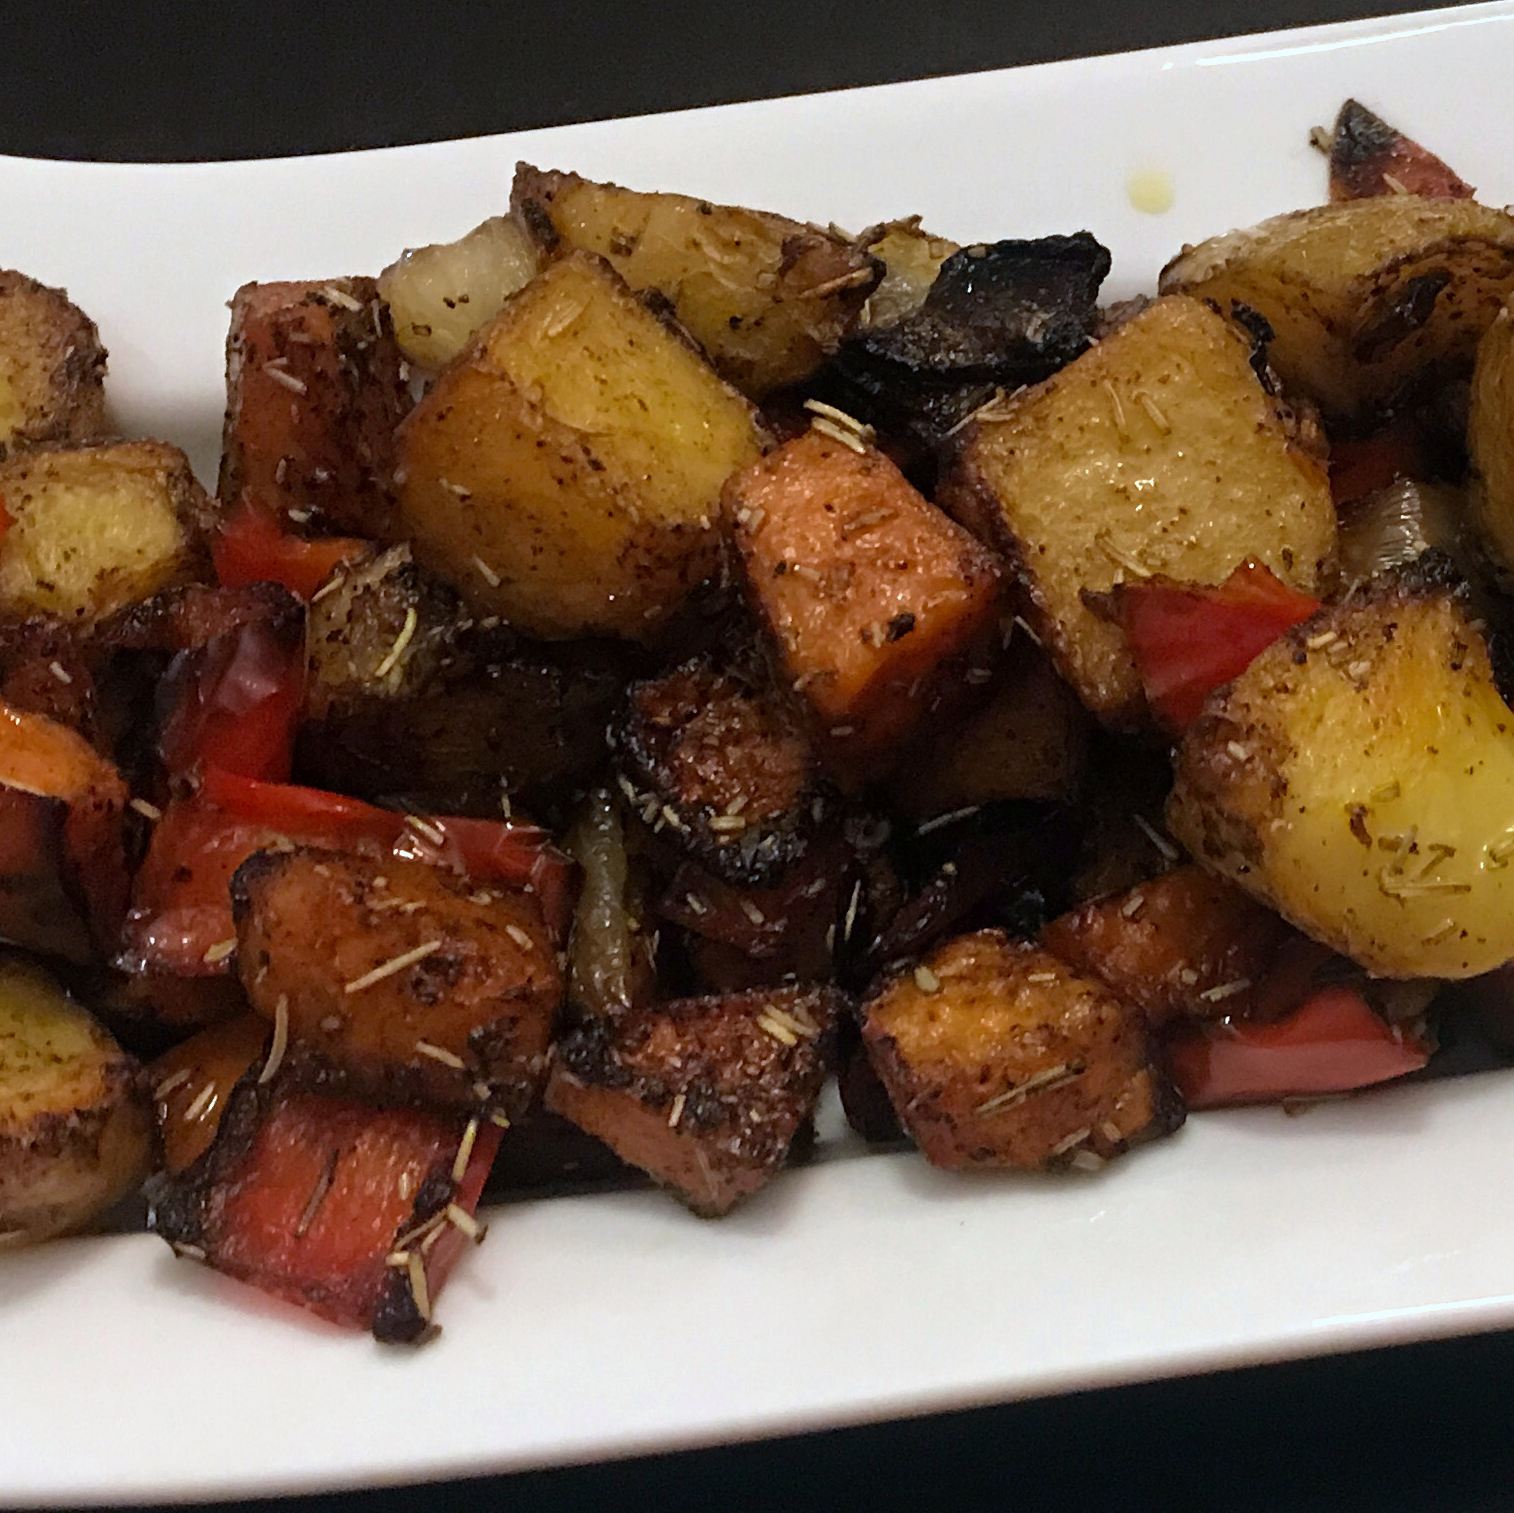 roasted potatoes, carrots, and bell peppers on a white ceramic serving dish